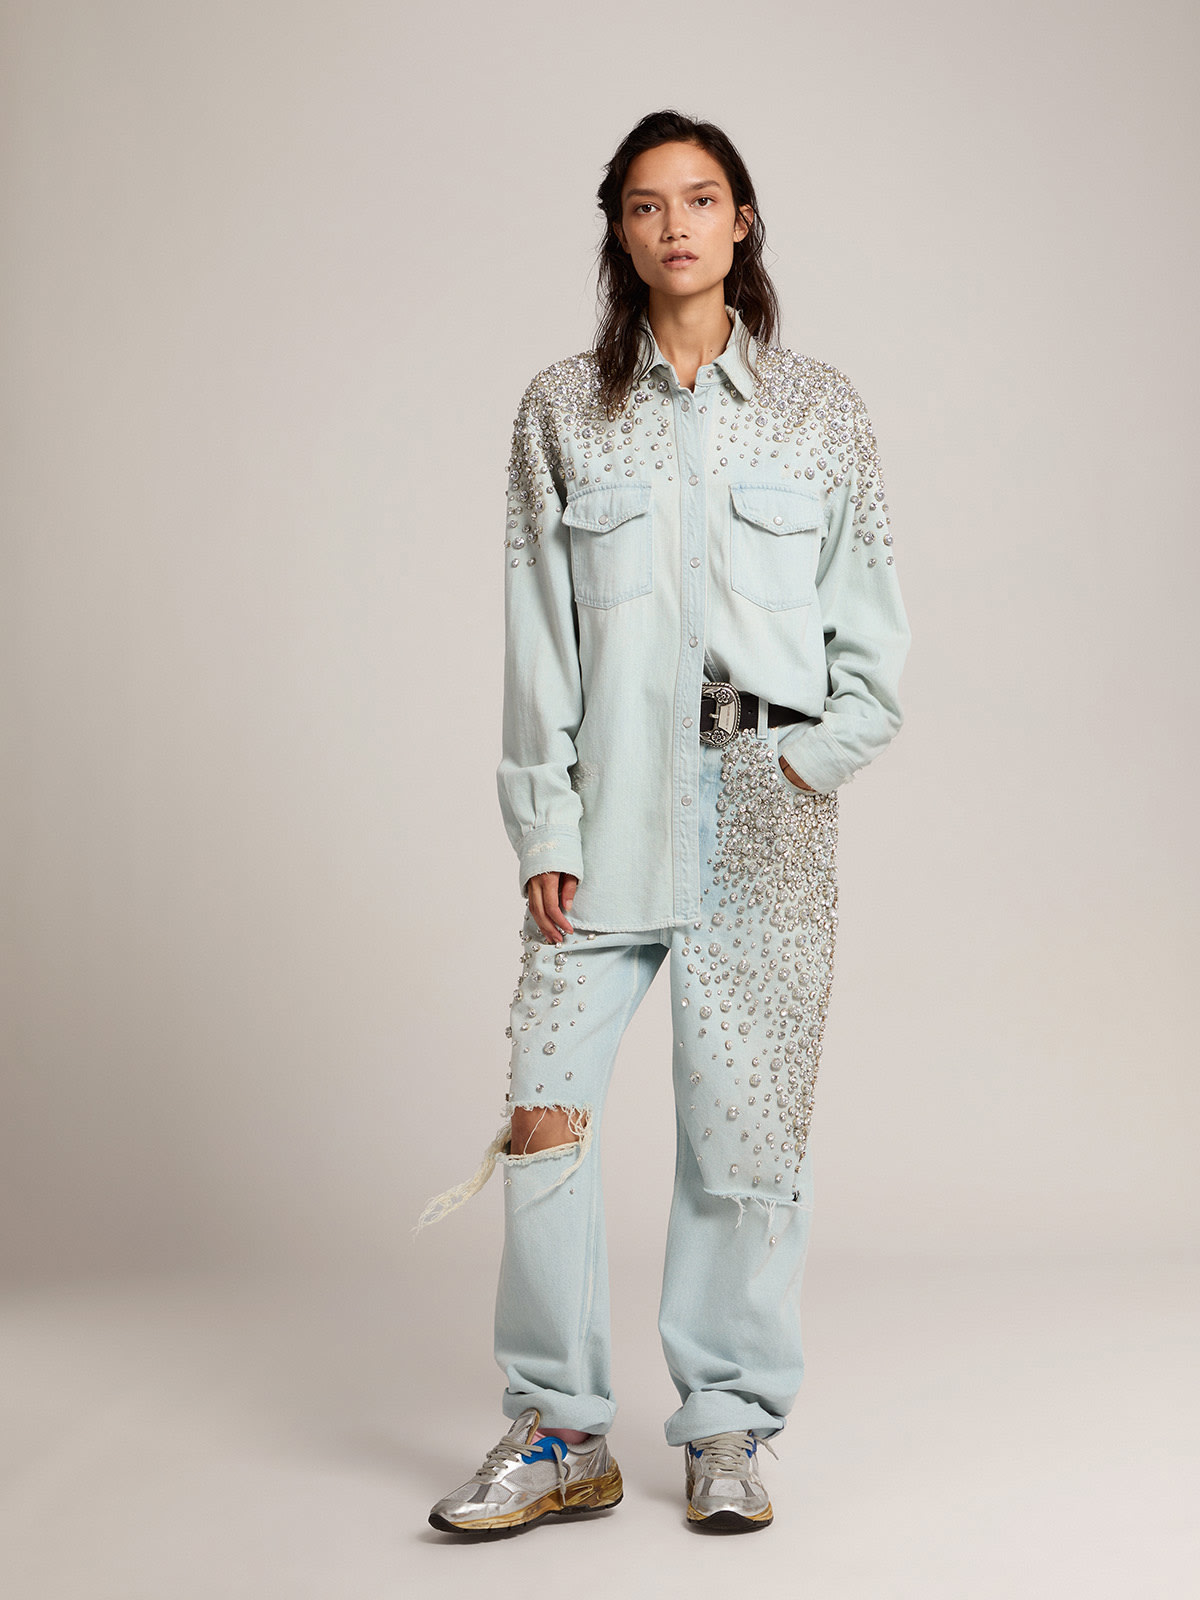 Golden Goose - Women's bleached boyfriend shirt with cabochon crystals in 